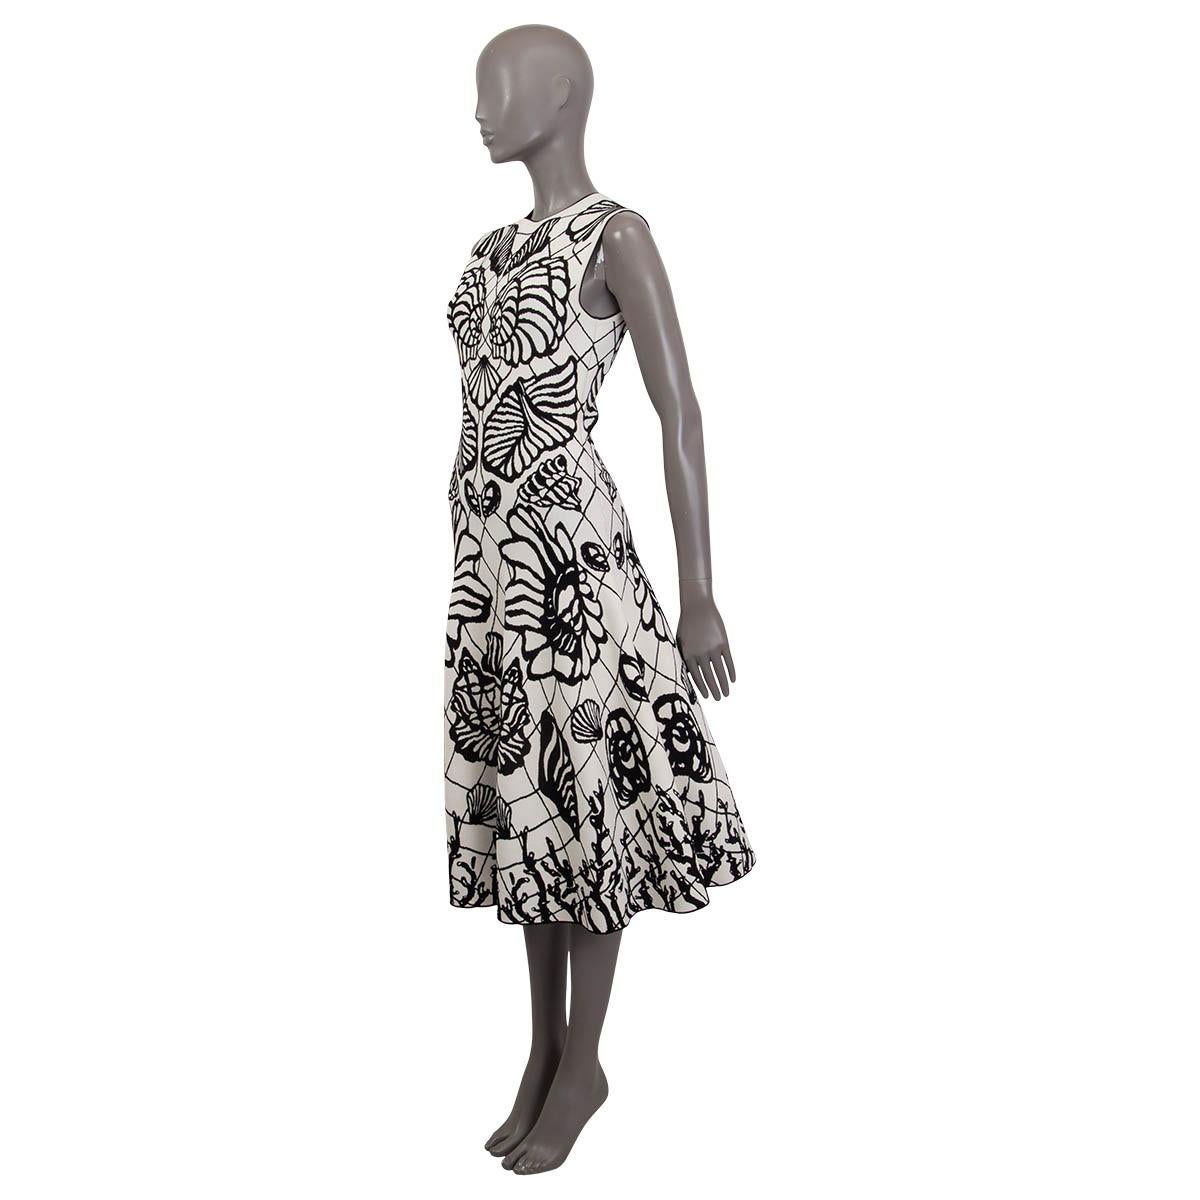 100% authentic Alexander McQueen monochrome shell-print midi skater dress black and white viscose (81%), polyamide (2%) and elastane (1%) (please note the content tag is missing). Features a crew neckline and a flared skirt. Embellished with an